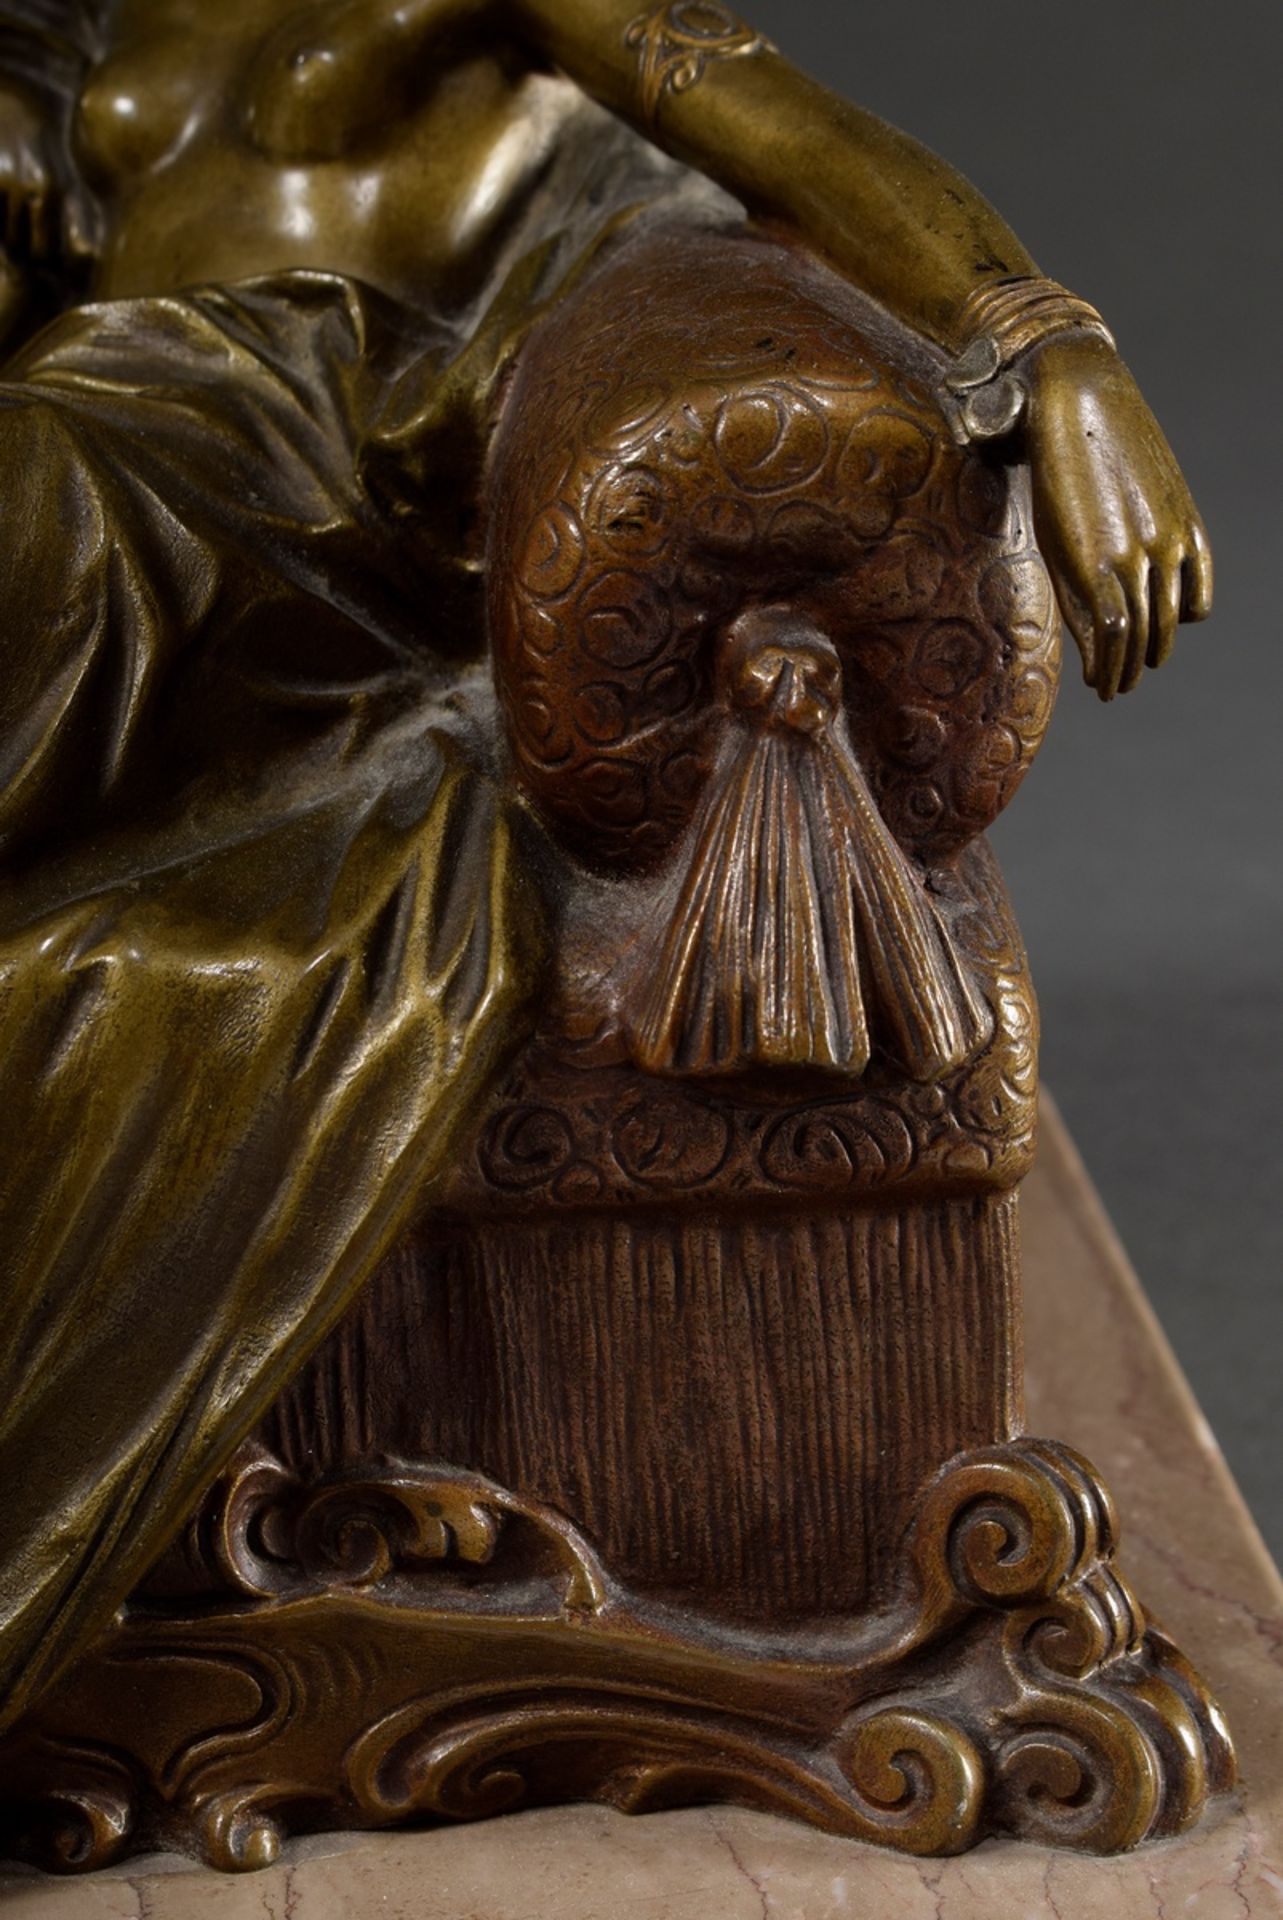 Unknown artist c. 1920 "Lascivious lady on armchair", bronze with various patinas on reddish marble - Image 3 of 8